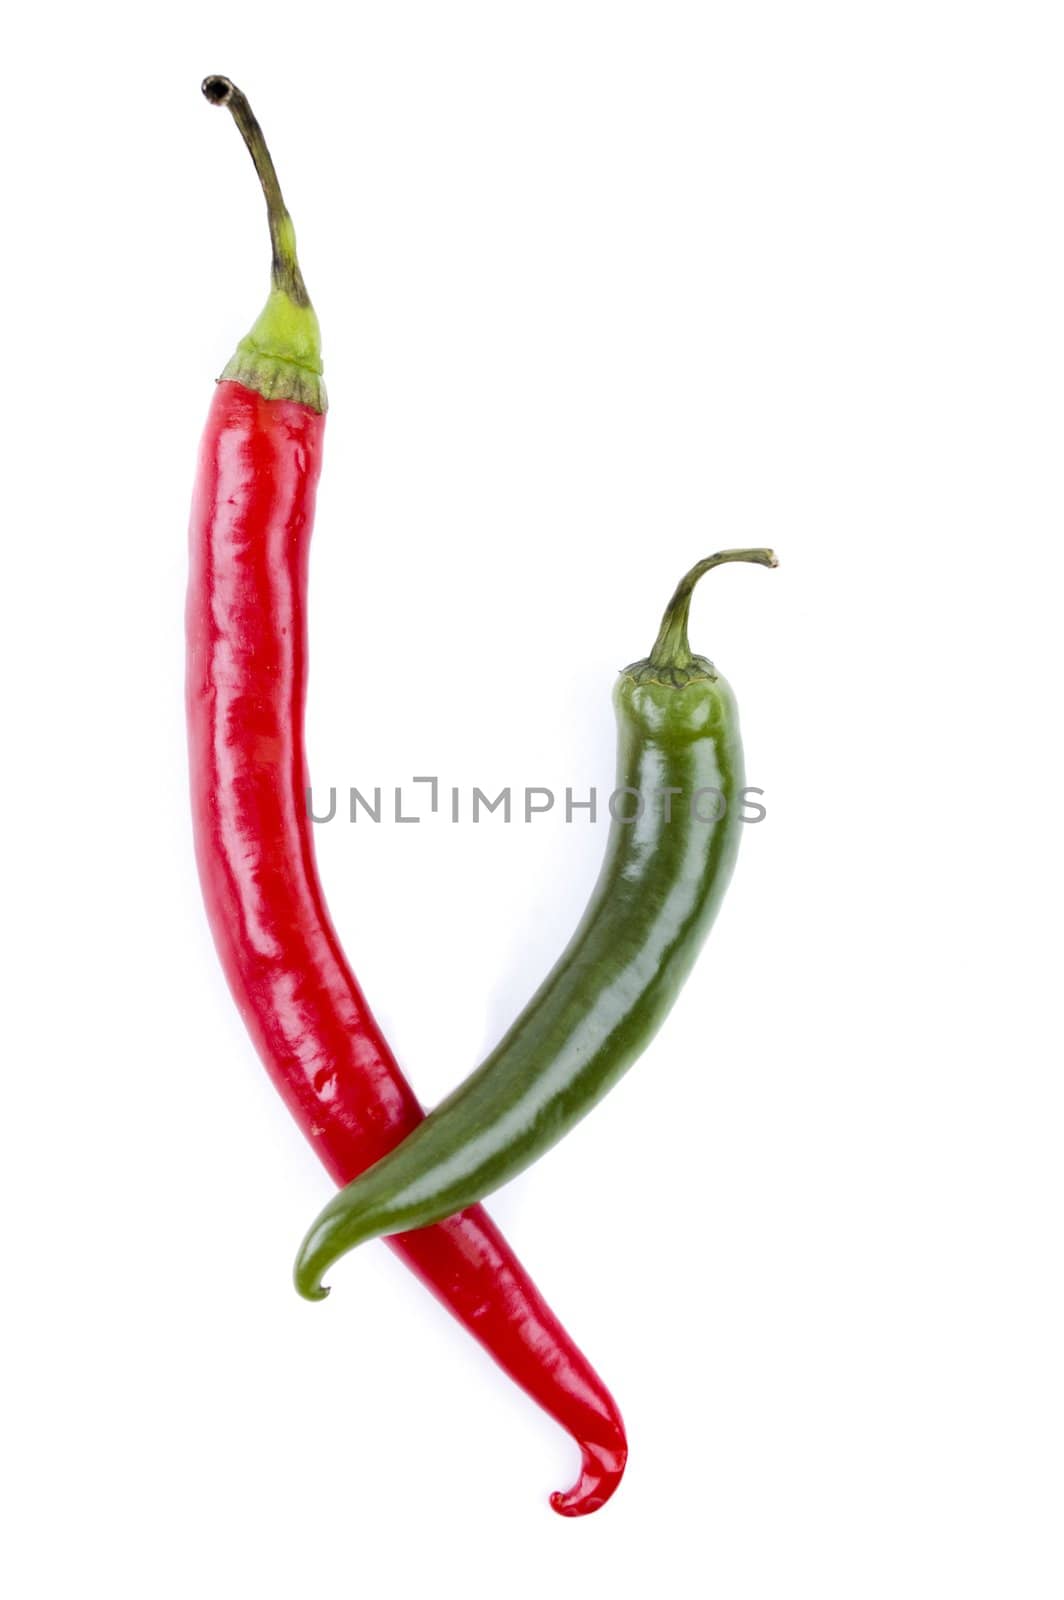 Red and green chili peppers on white background by Triphka